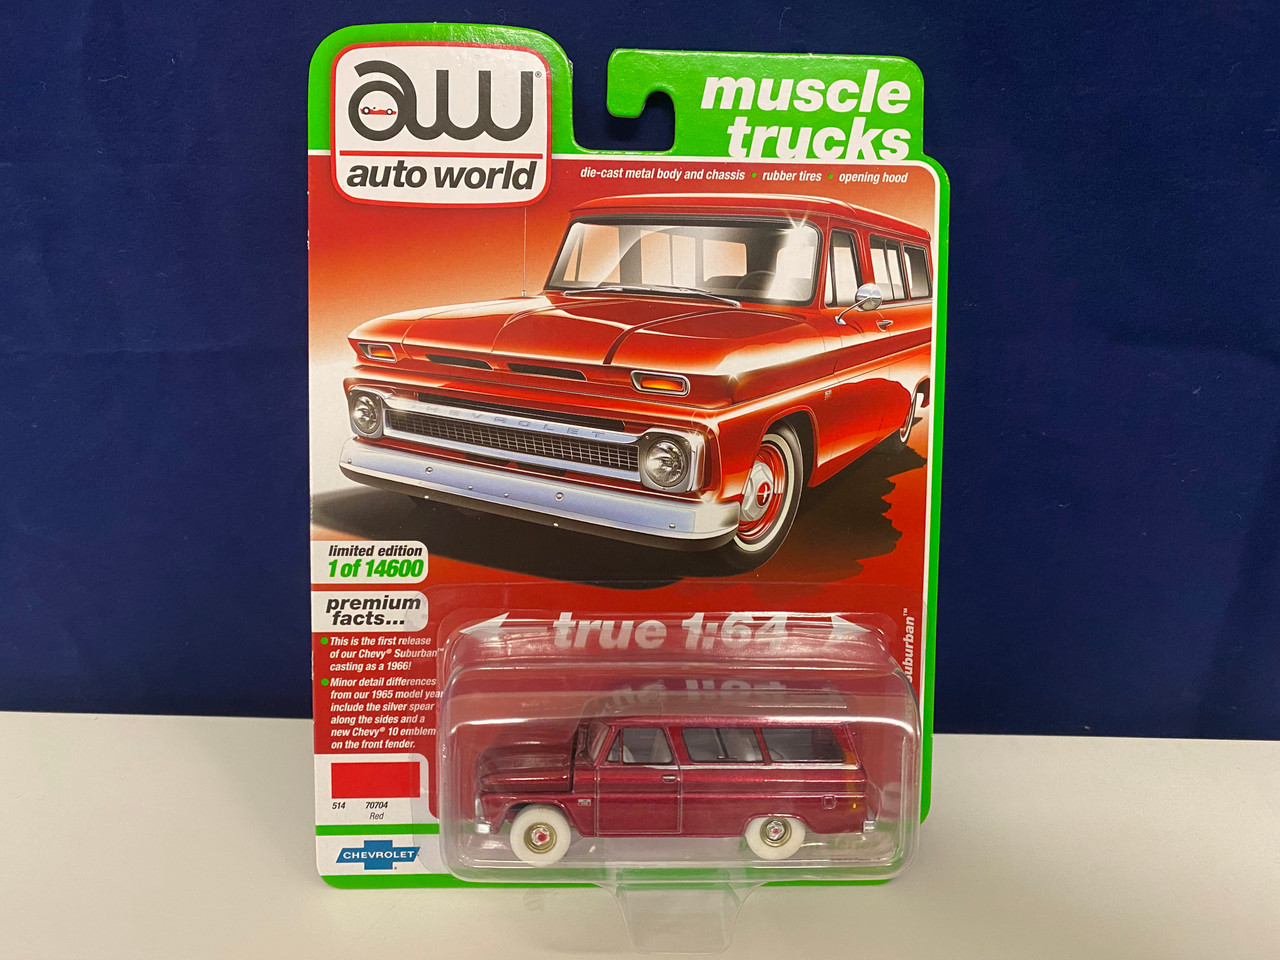 CHASE CAR 1/64 Auto World 1966 Chevrolet Suburban Red with White Interior "Muscle Trucks" Diecast Car Model